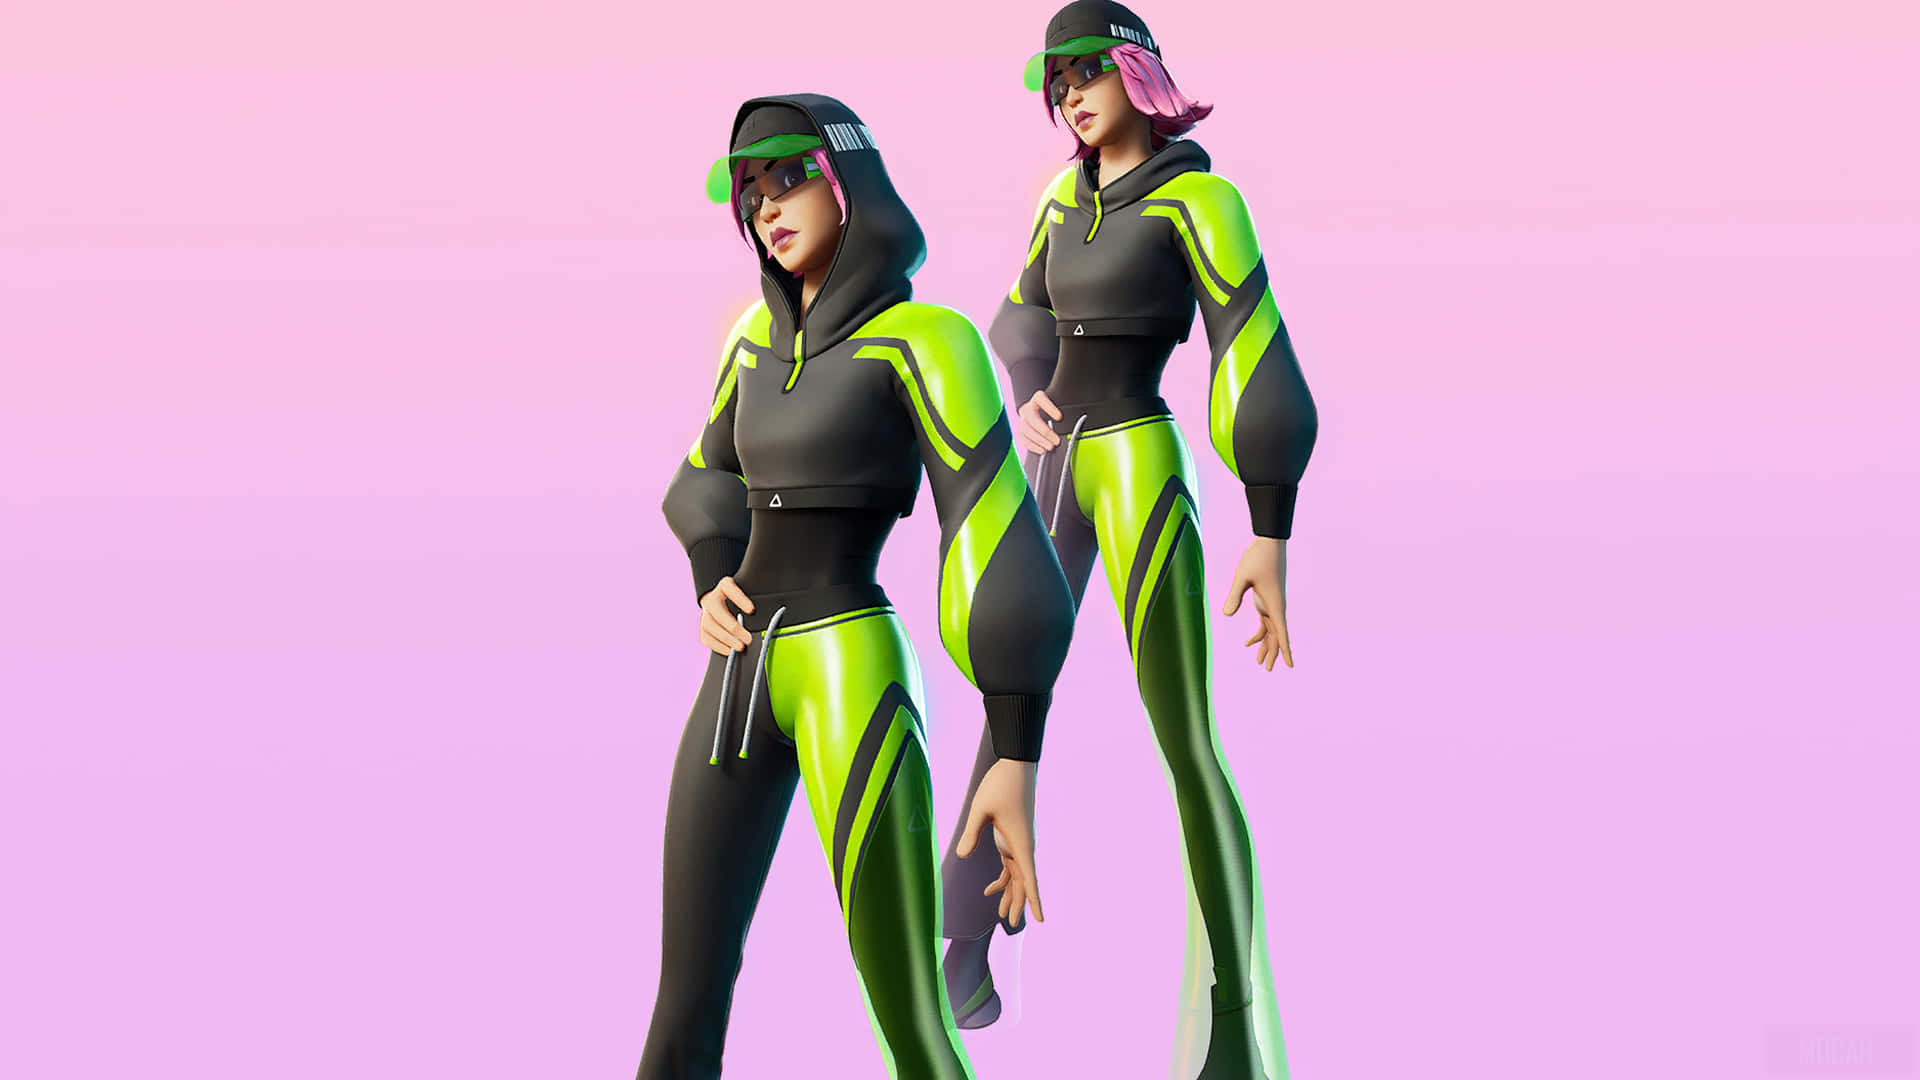 Two Women In Green And Black Outfits Wallpaper